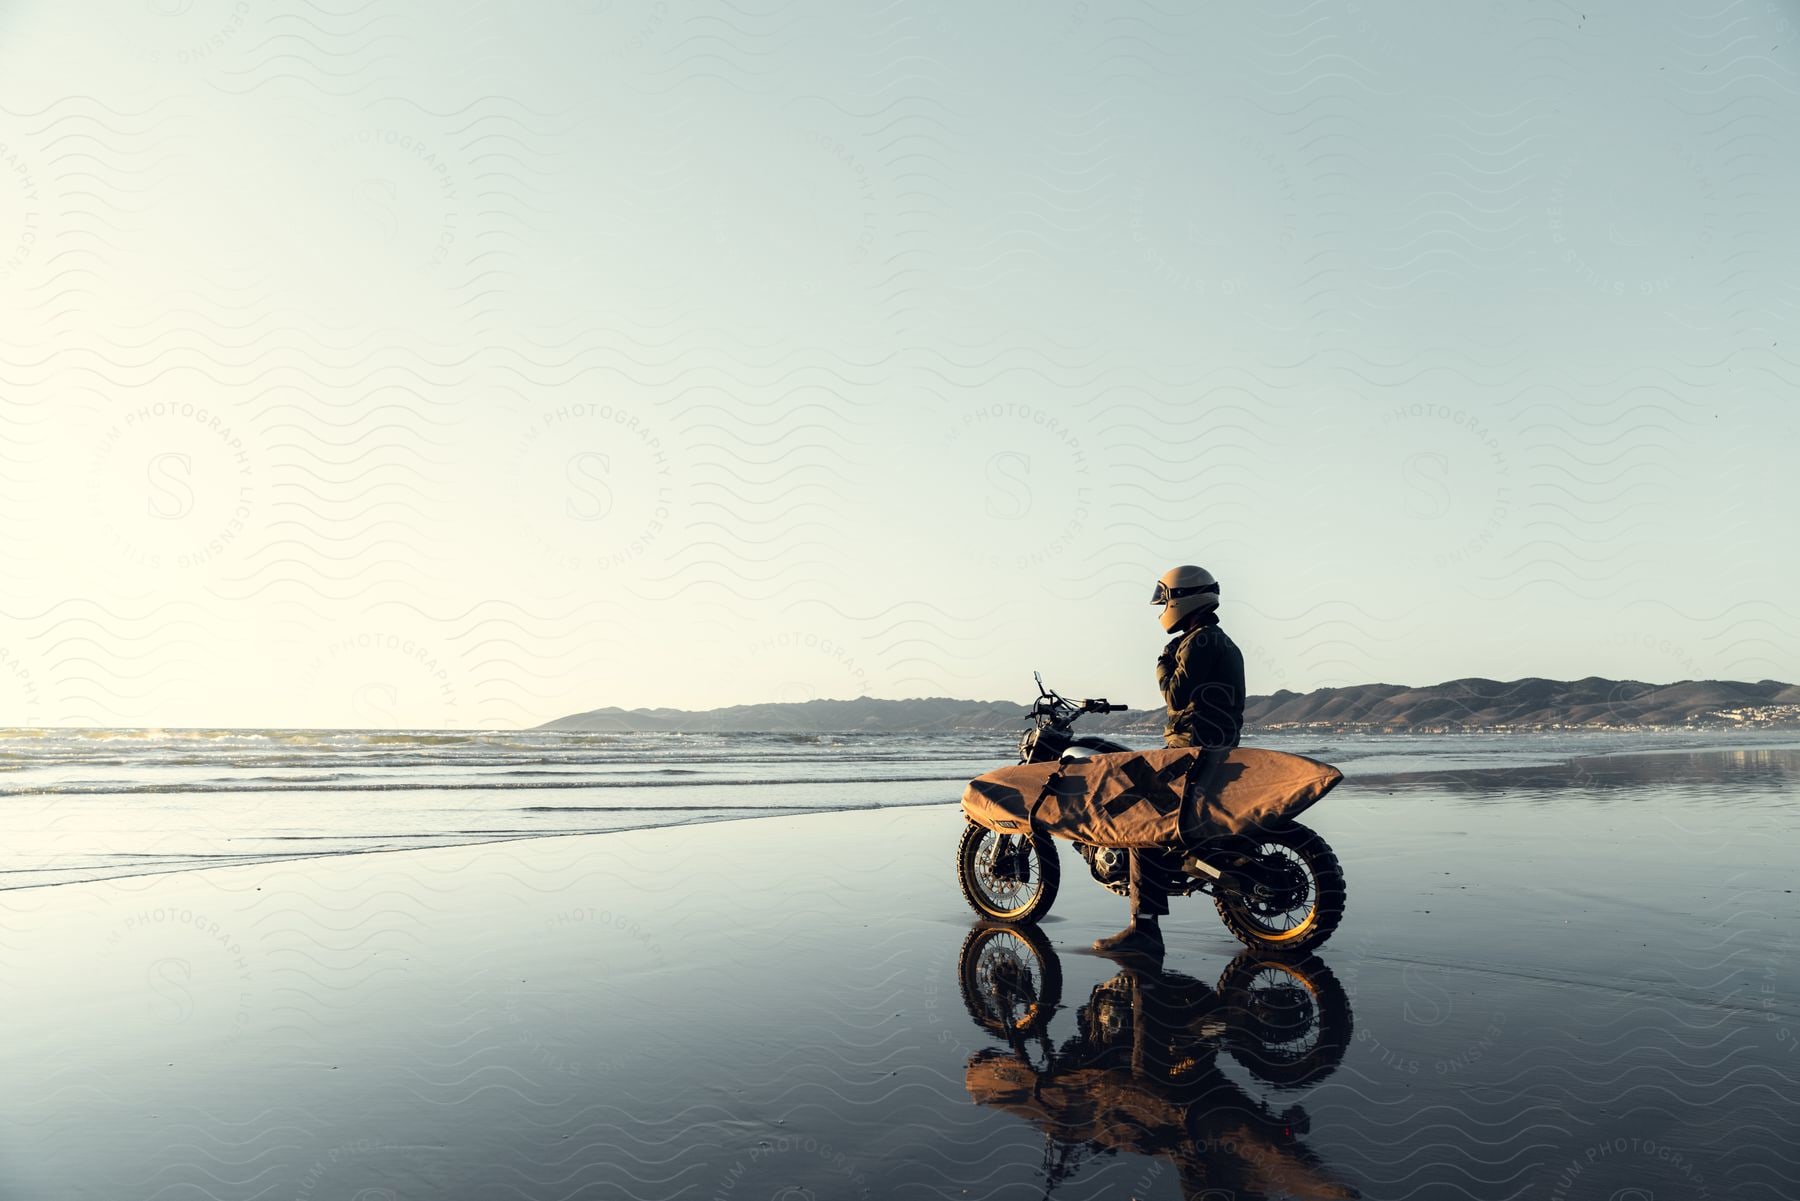 Person sits on a motorcycle with a surfboard on the coast near low mountains.